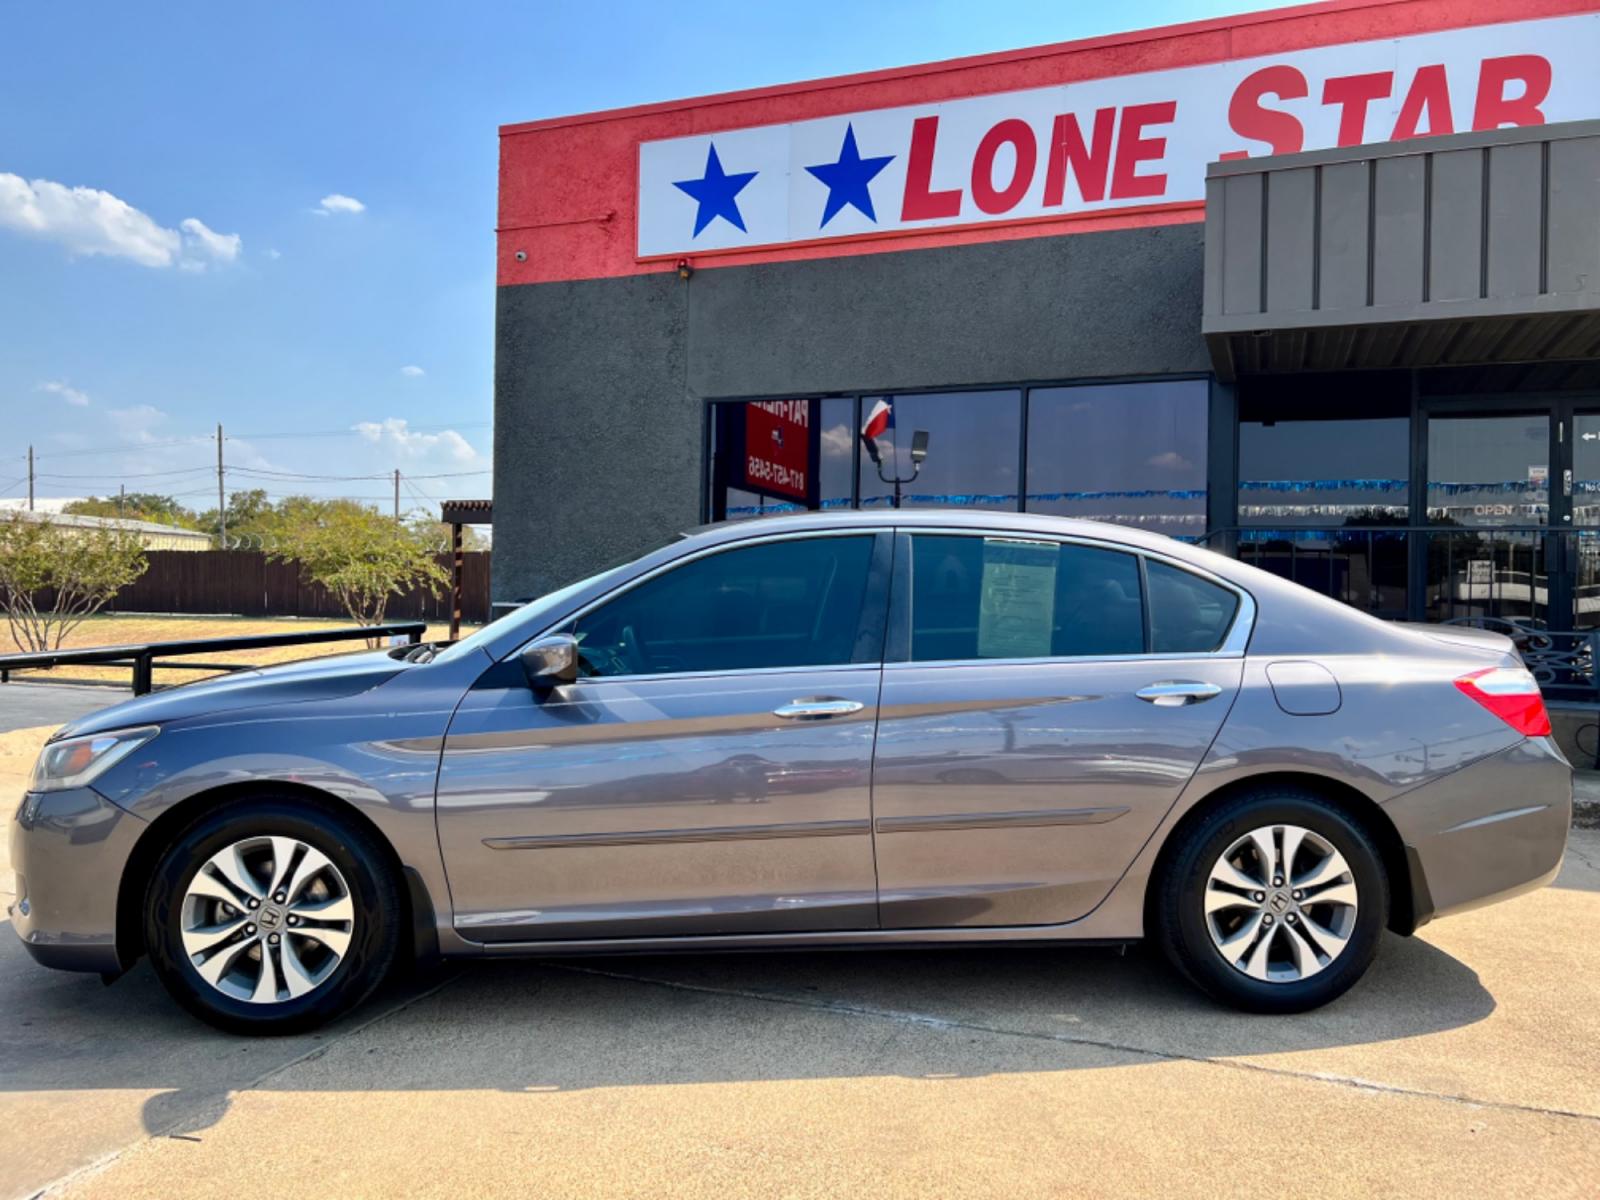 2015 SILVER HONDA ACCORD (1HGCR2F36FA) , located at 5900 E. Lancaster Ave., Fort Worth, TX, 76112, (817) 457-5456, 0.000000, 0.000000 - This is a 2015 HONDA ACCORD 4 DOOR SEDAN that is in excellent condition. There are no dents or scratches. The interior is clean with no rips or tears or stains. All power windows, door locks and seats. Ice cold AC for those hot Texas summer days. It is equipped with a CD player, AM/FM radio, AUX por - Photo #3